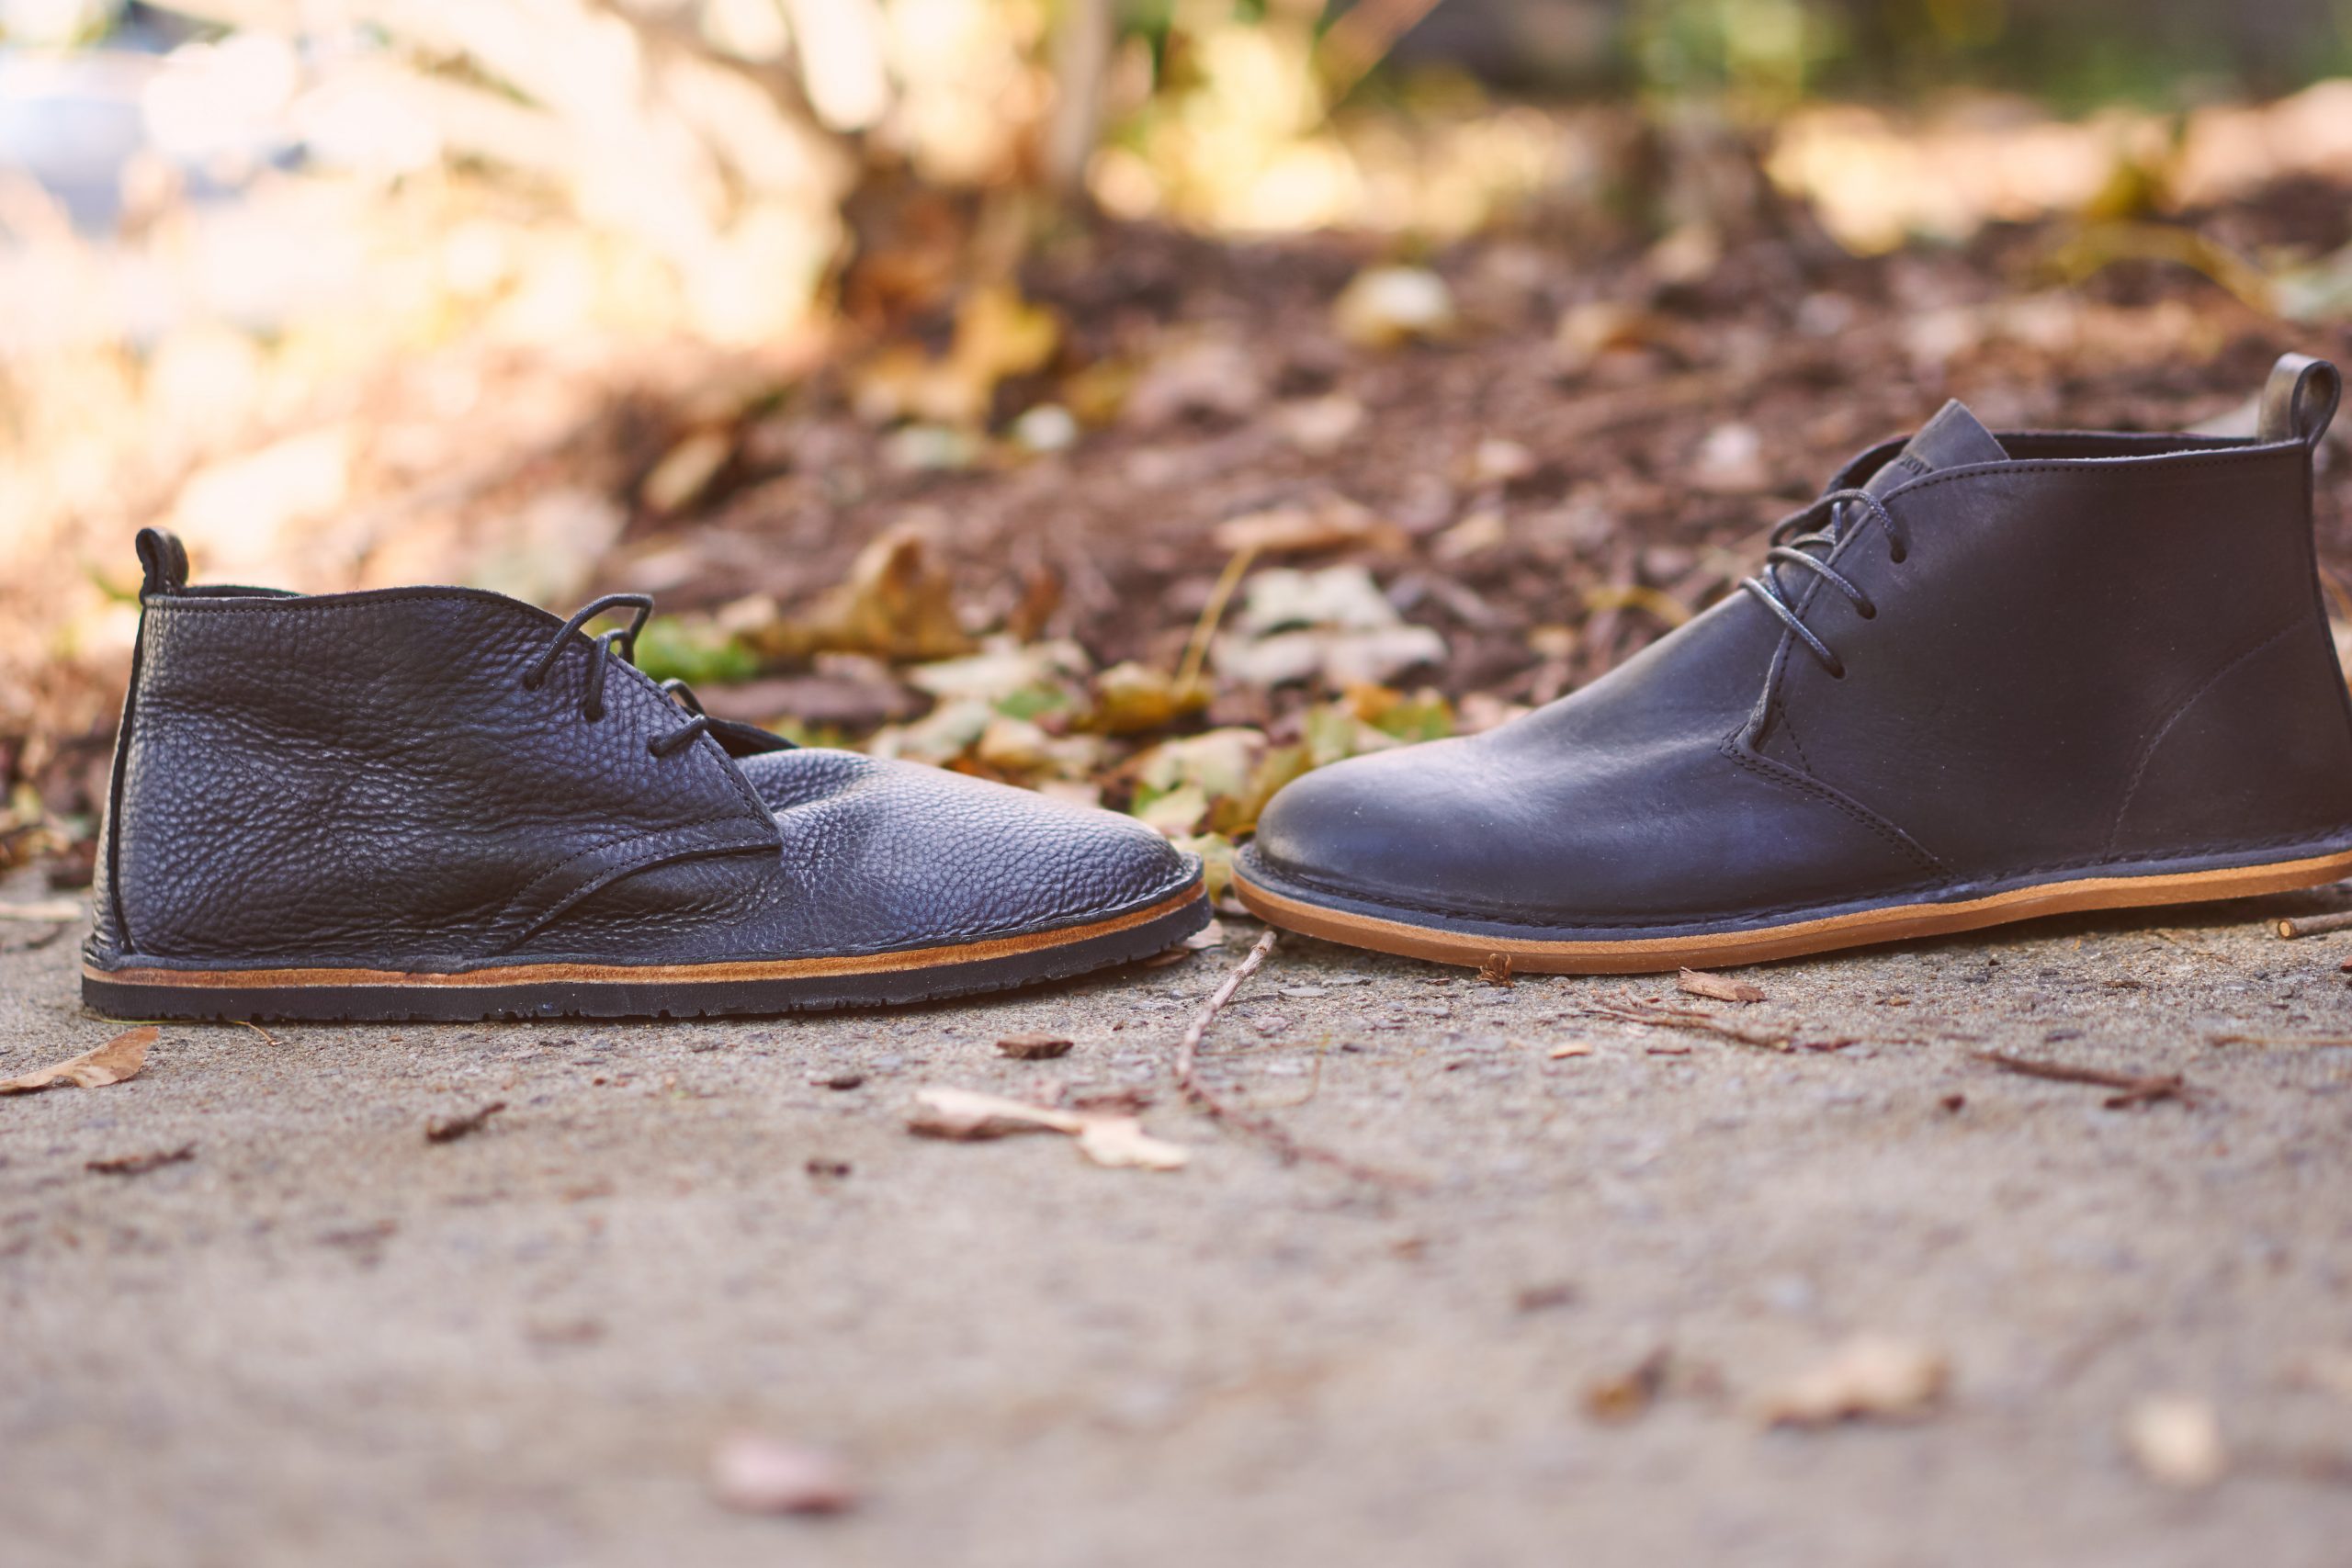 The Hawthorne and its leather midsole/Vibram Geo sole compared to the stiffer Porto sole from Vivobarefoot